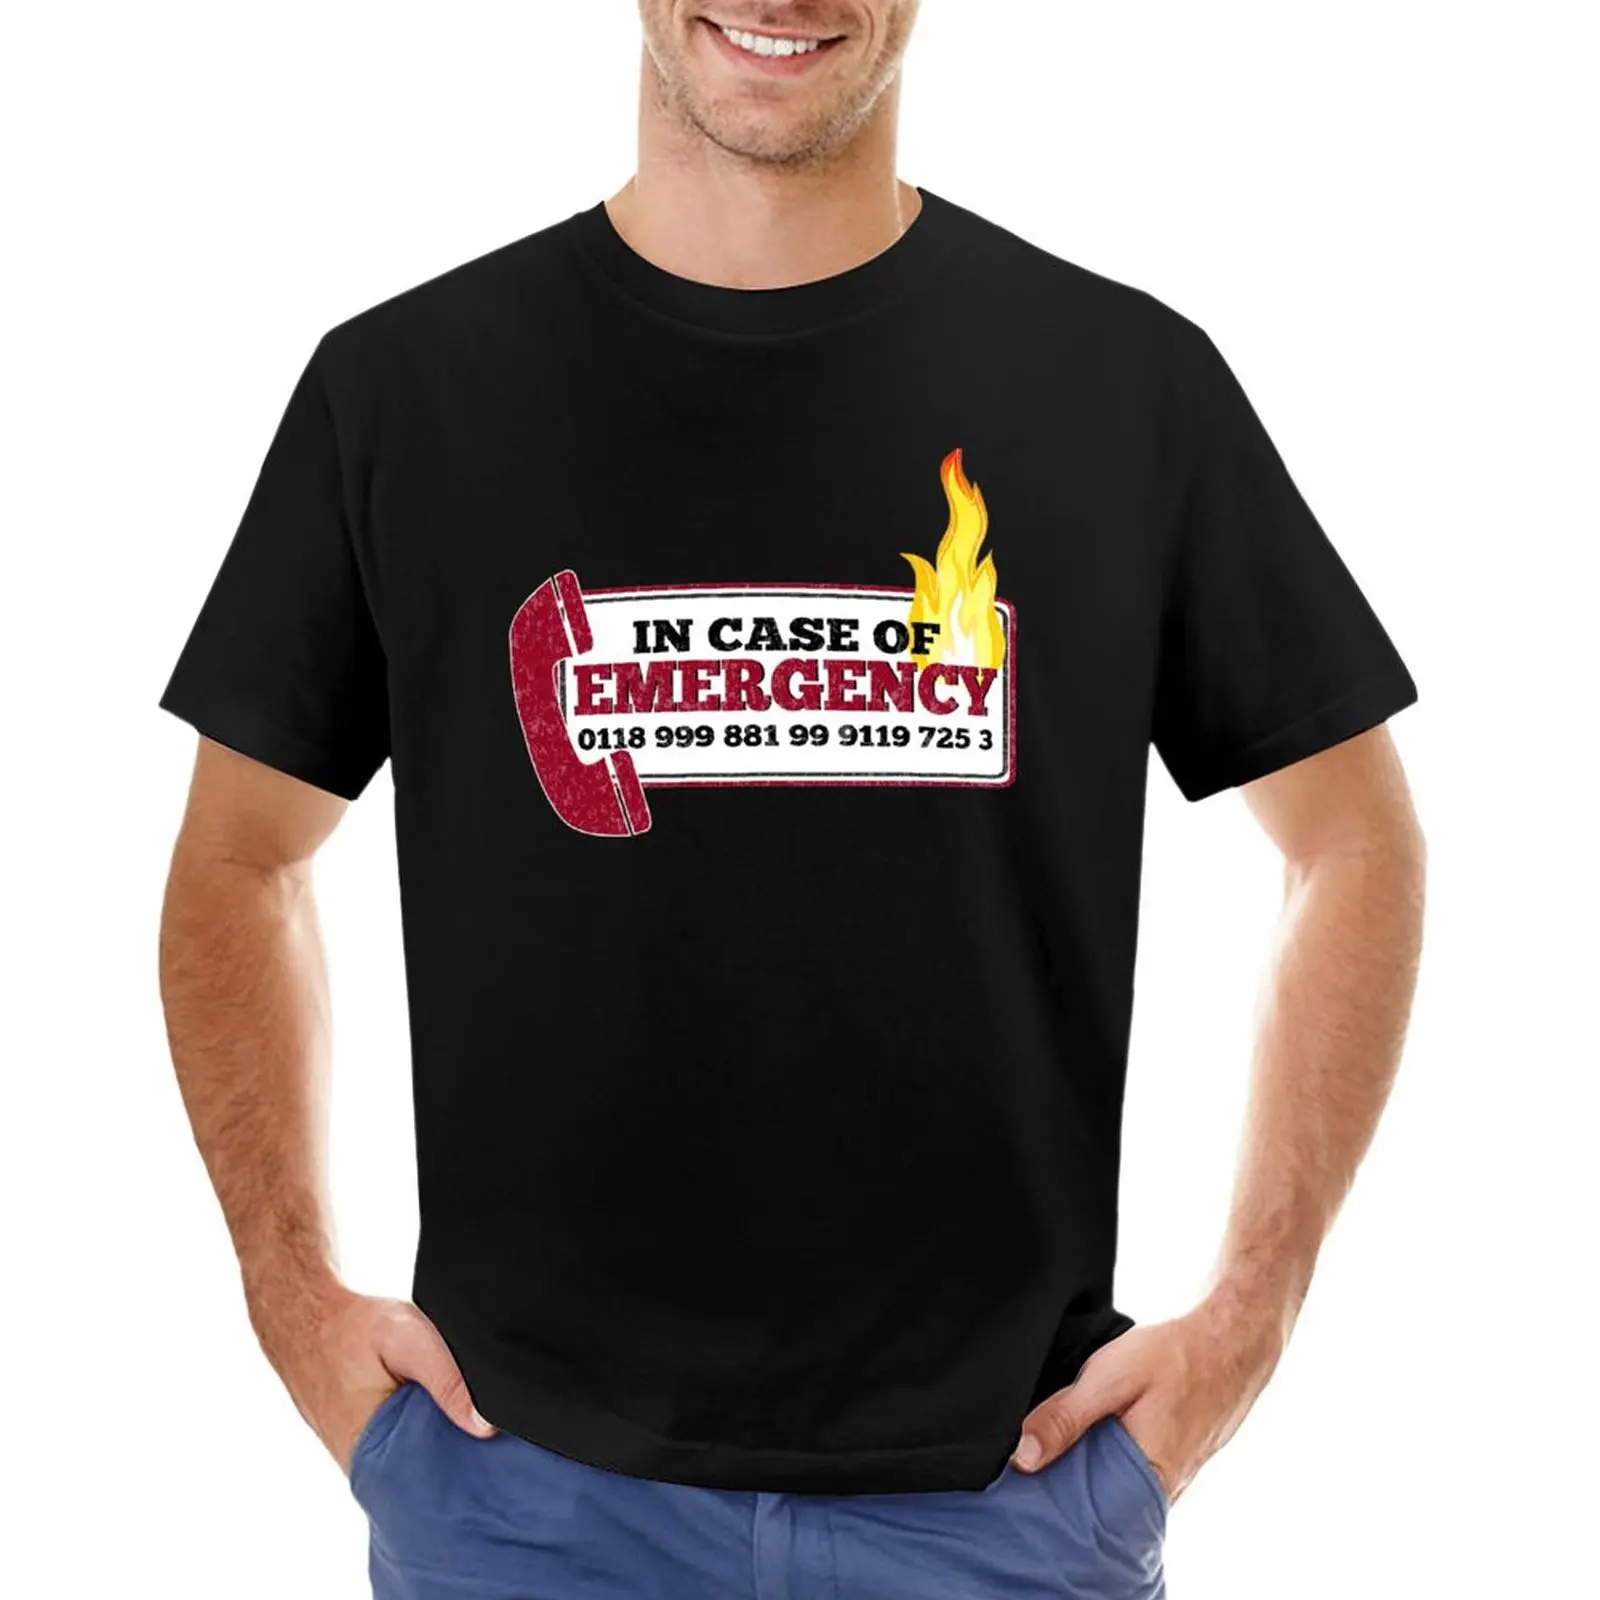 

It Crowd Inspired - New Emergency Number - 0118 999 881 99 9119 725 3 - Moss and the Fire T-Shirt